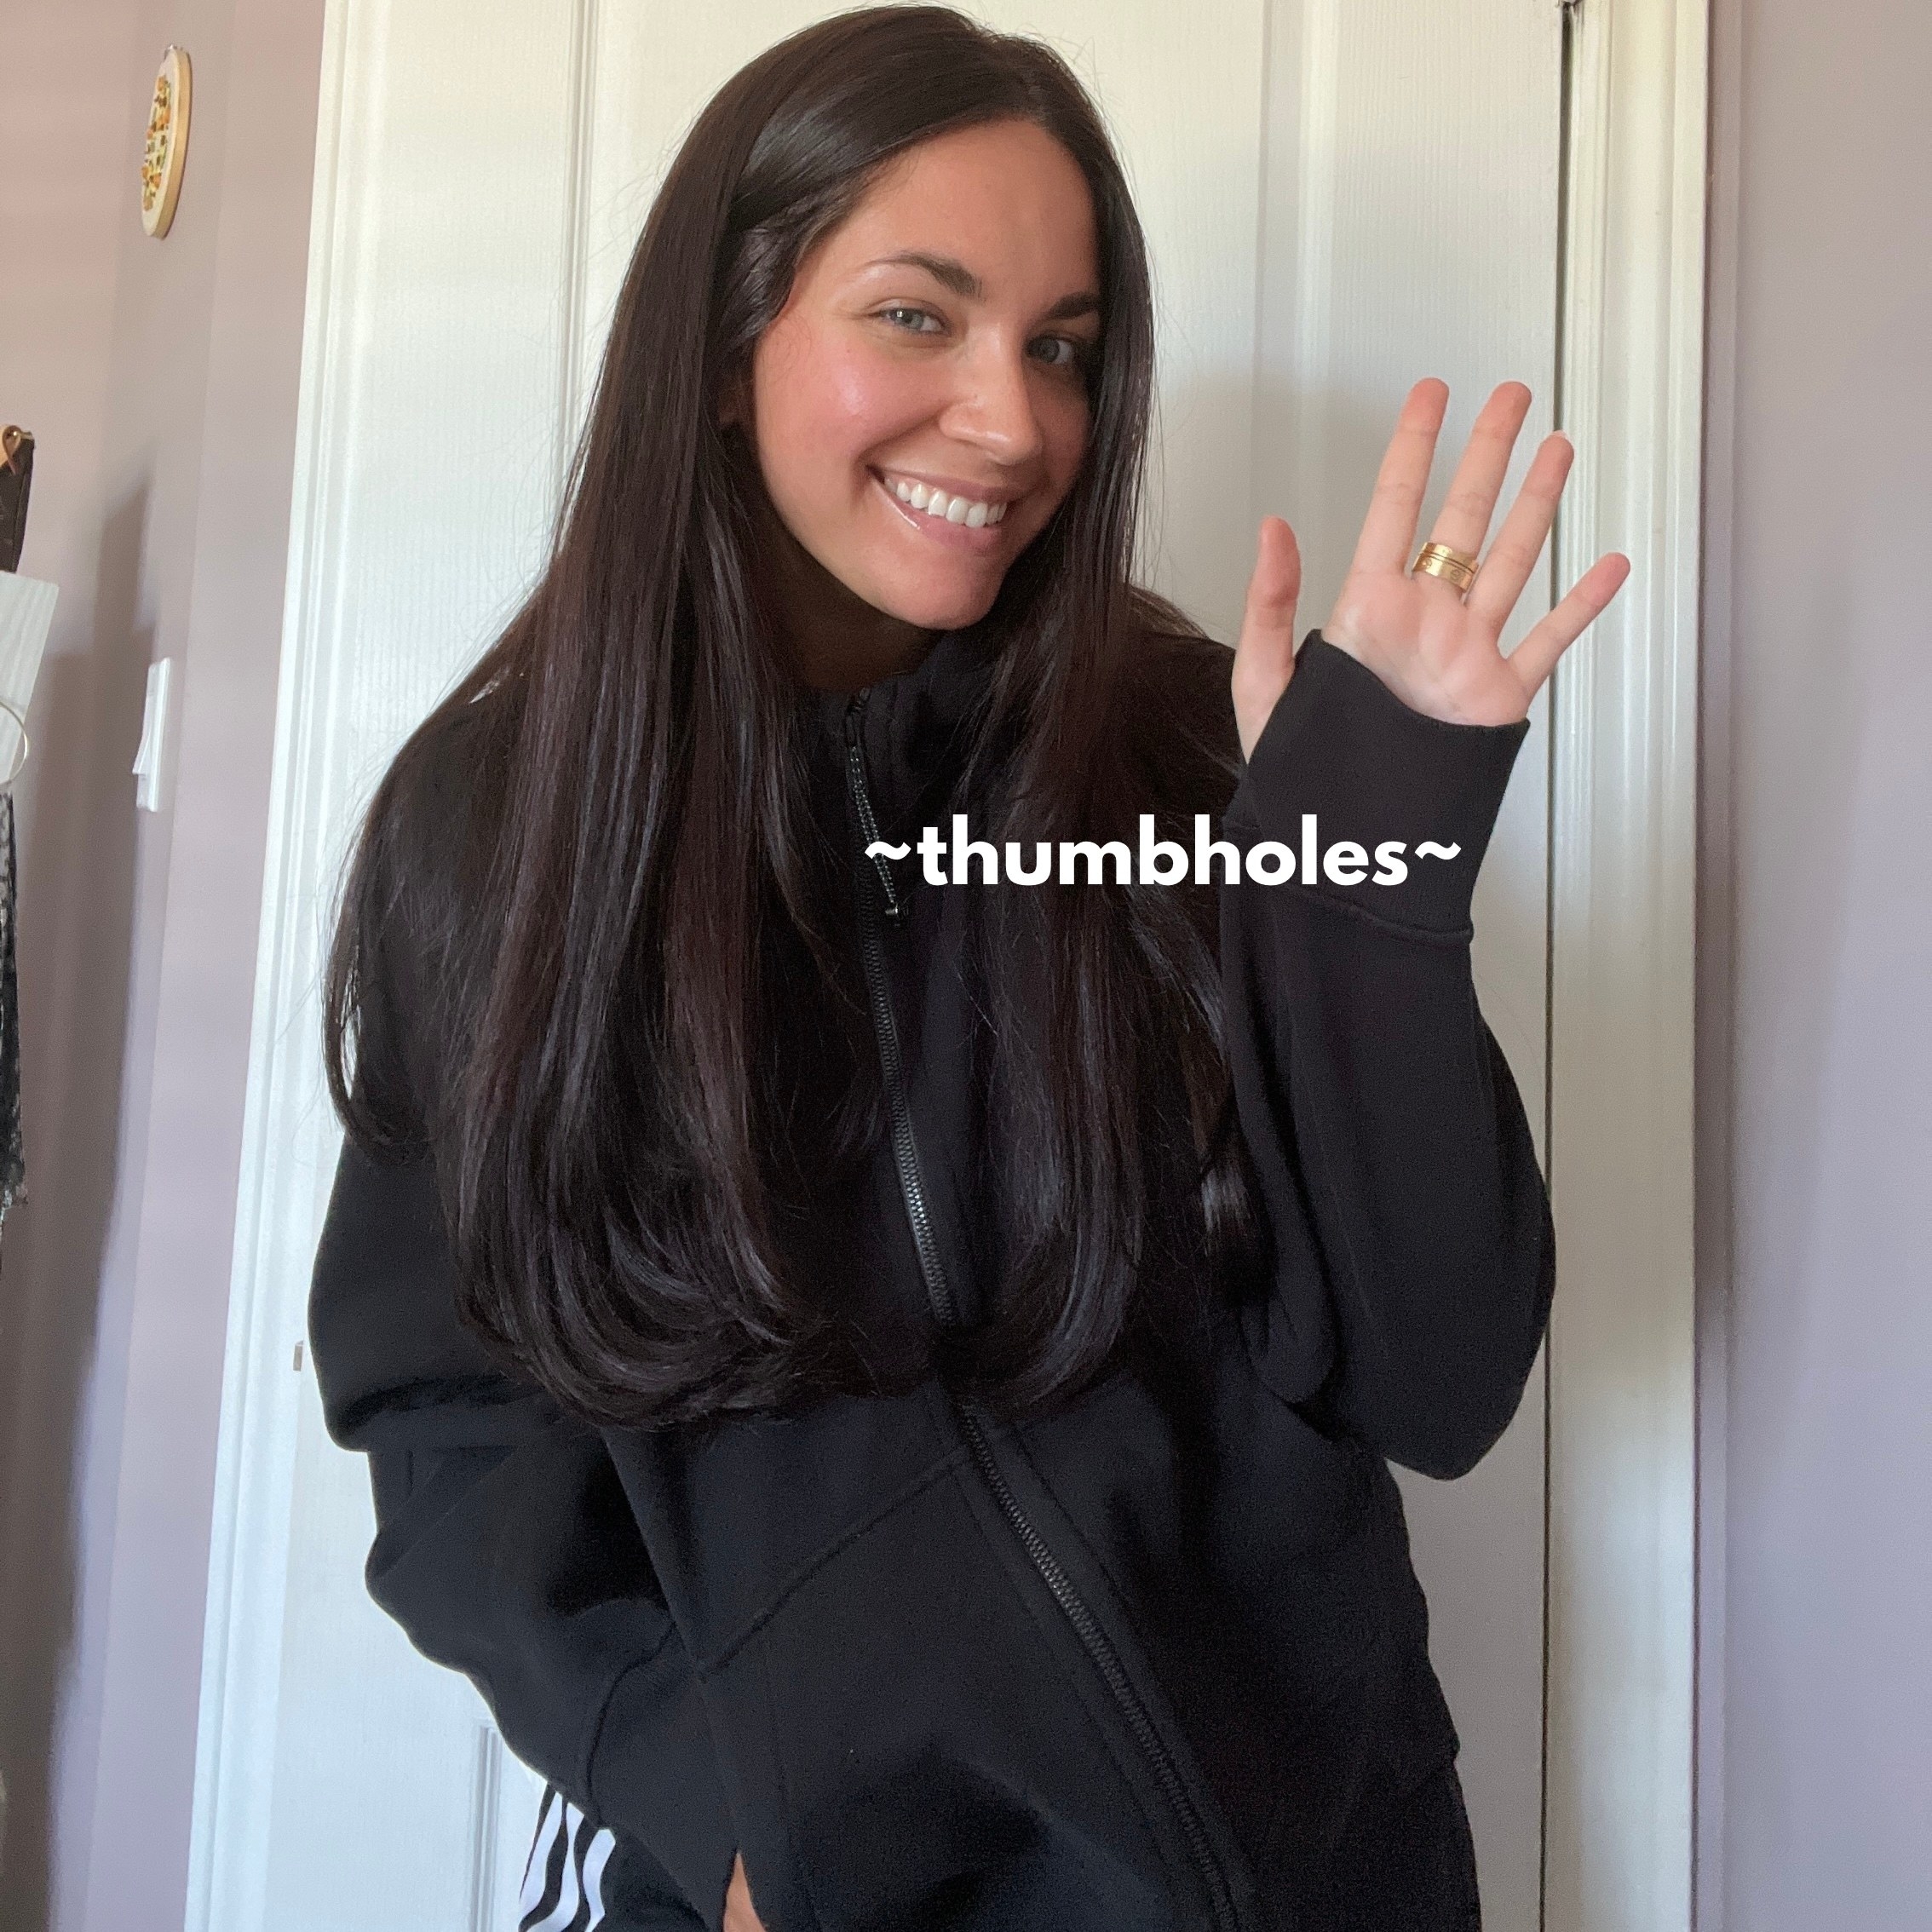 Melina wearing the sweater and showing off the thumbholes